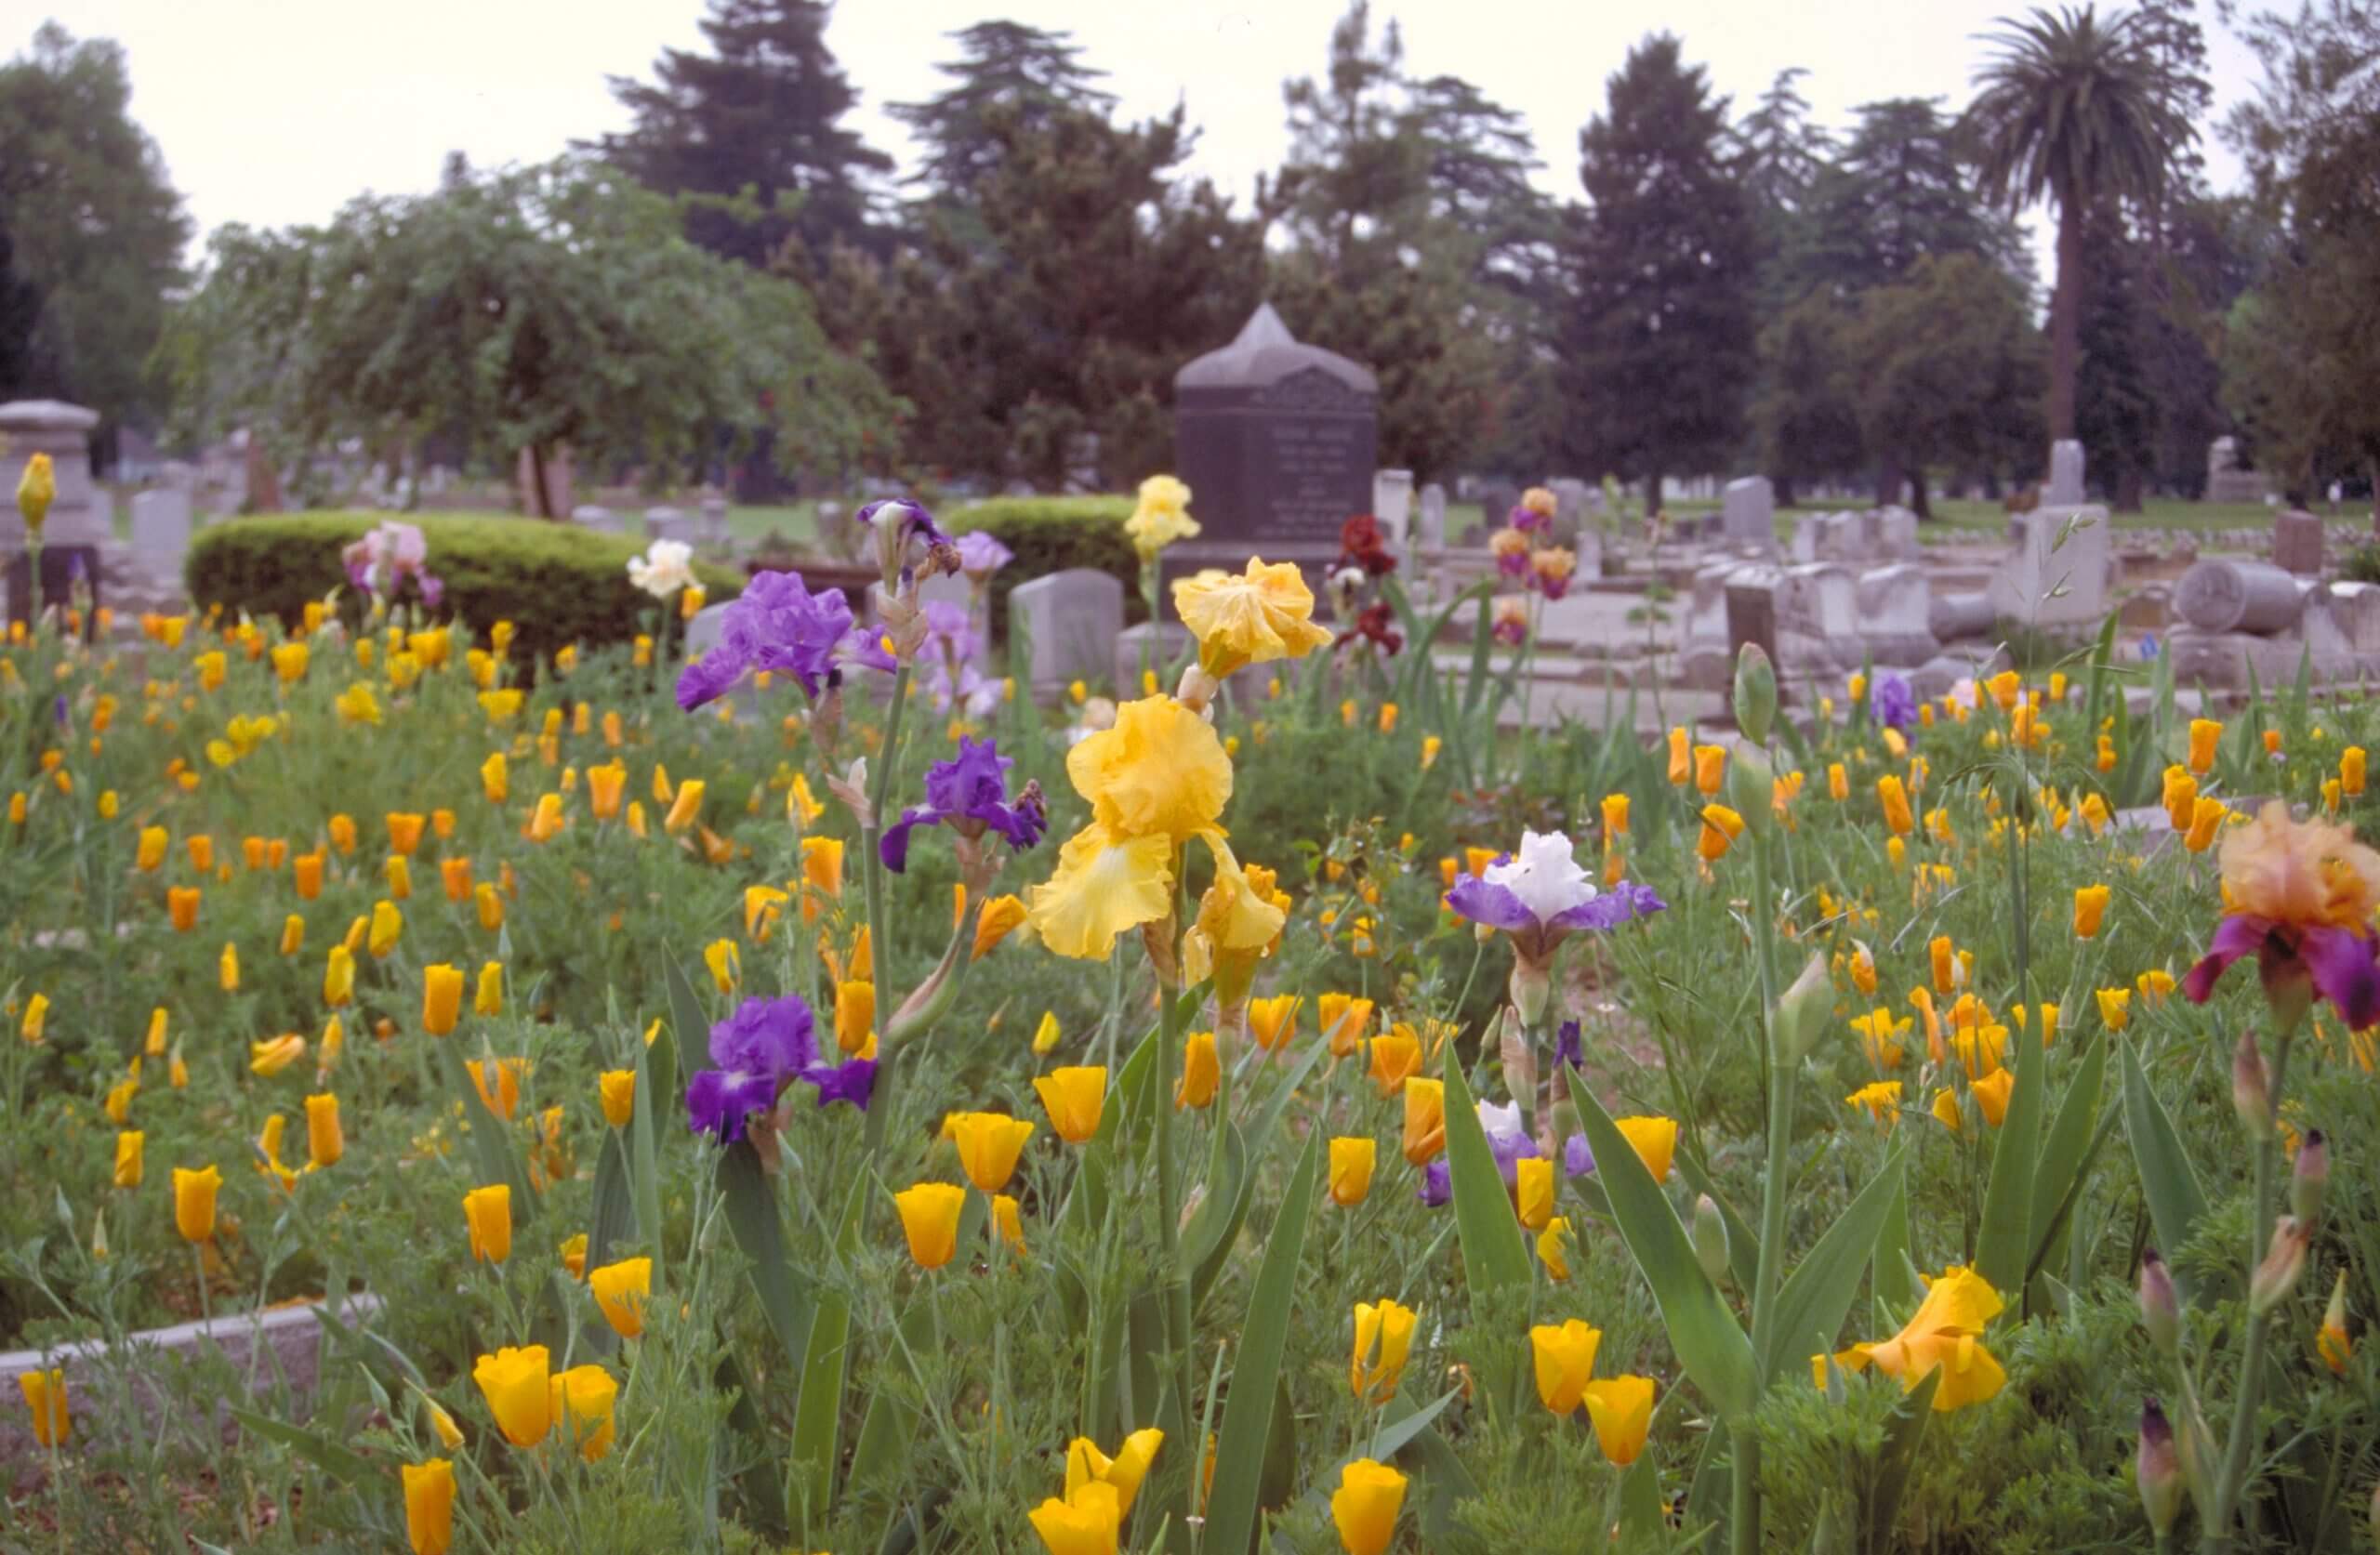 Some gardeners sowed wildflowers over fall planted bulbs and iris to fill vast areas of well-drained sandy soil in this historic Sacramento graveyard.